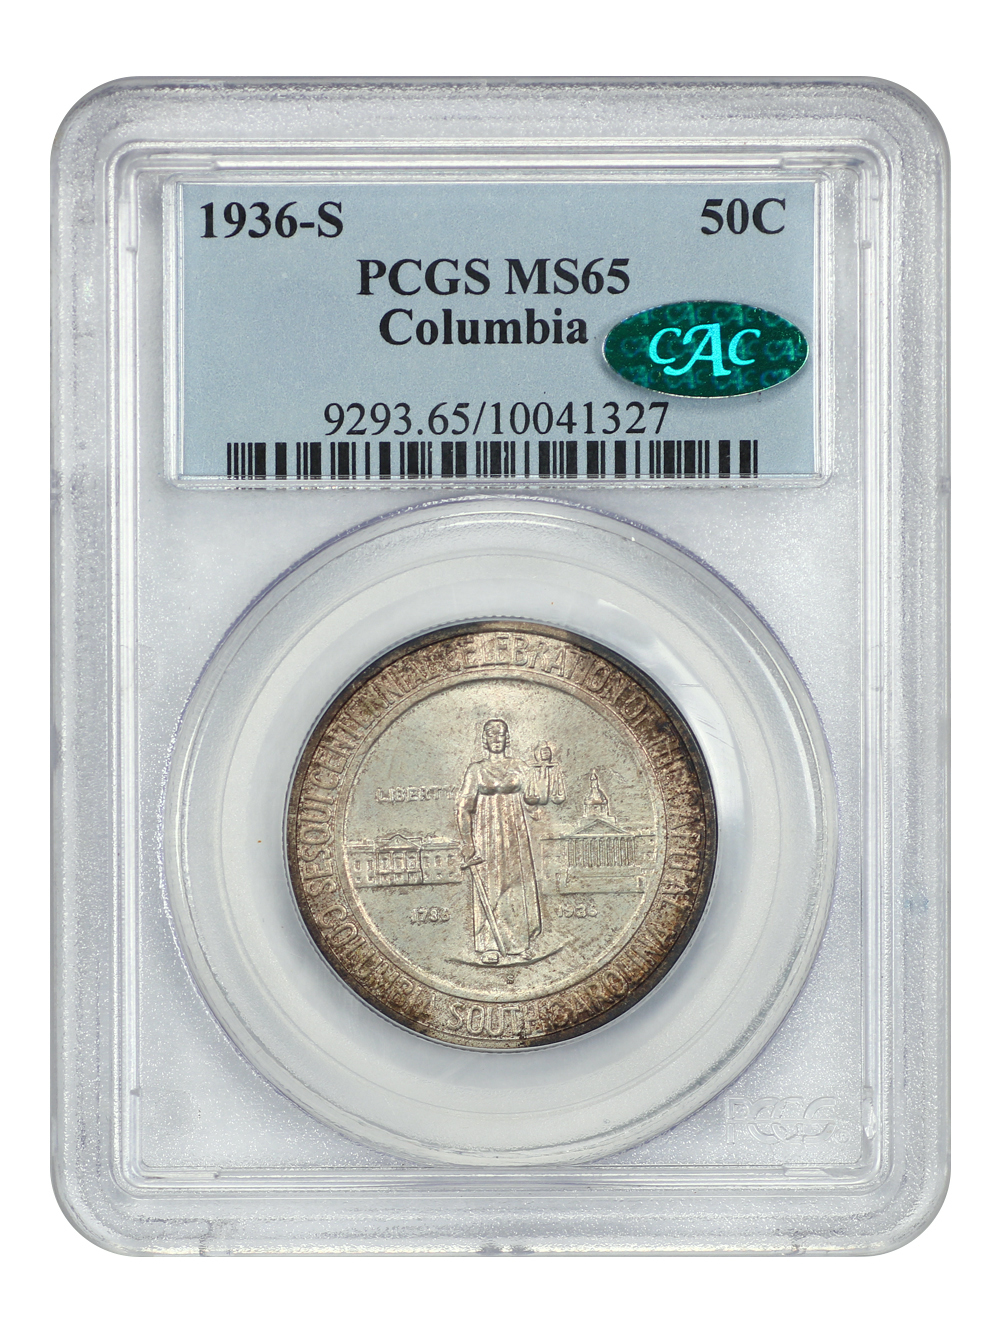 Primary image for 1936-S 50C Columbia PCGS/CAC MS65